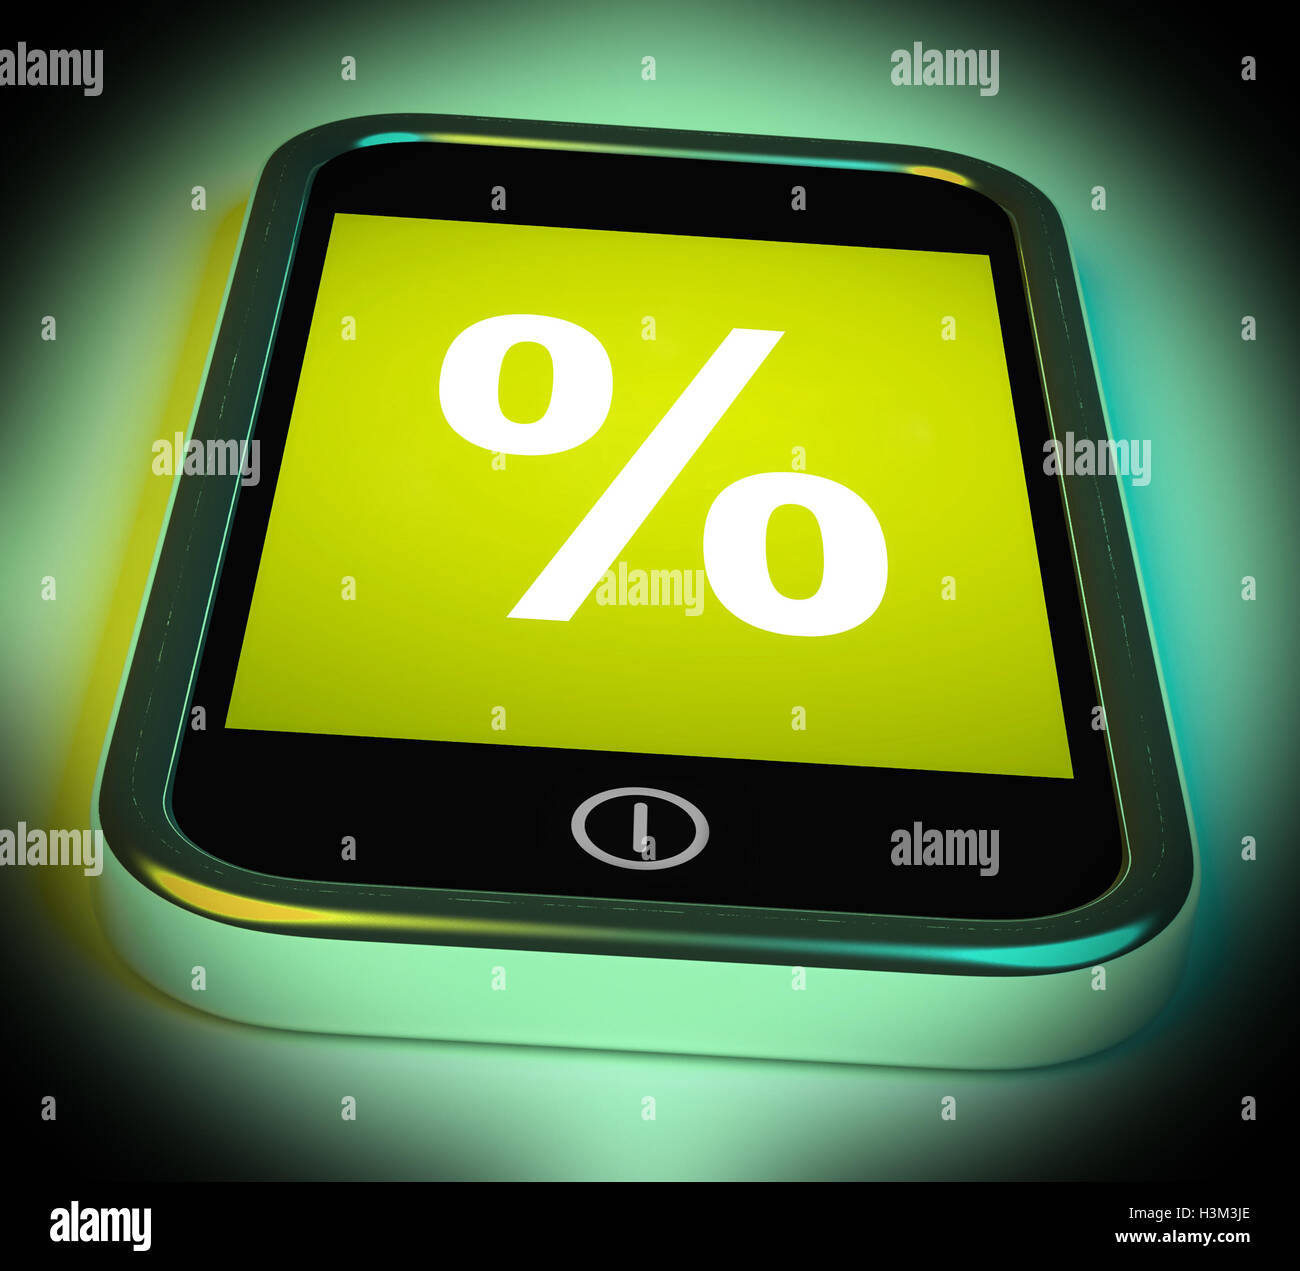 Percent Sign On Mobile Shows Percentage Discount Or Investment Stock Photo